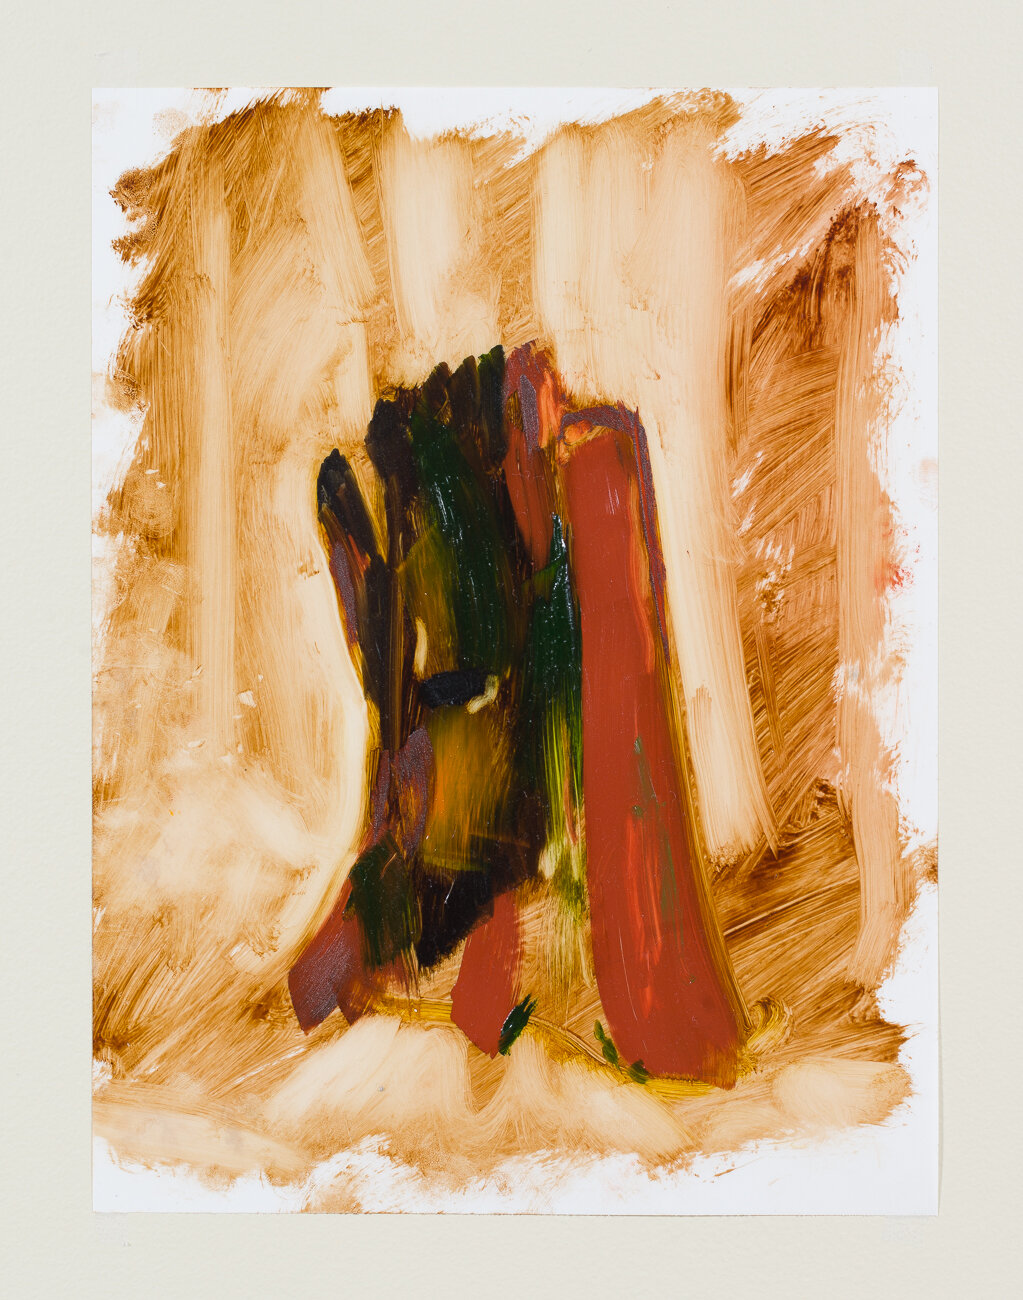 Peter Gynd, Untitled (Stump #39), 2021, oil on Yupo Translucent, 12 x 9 in.